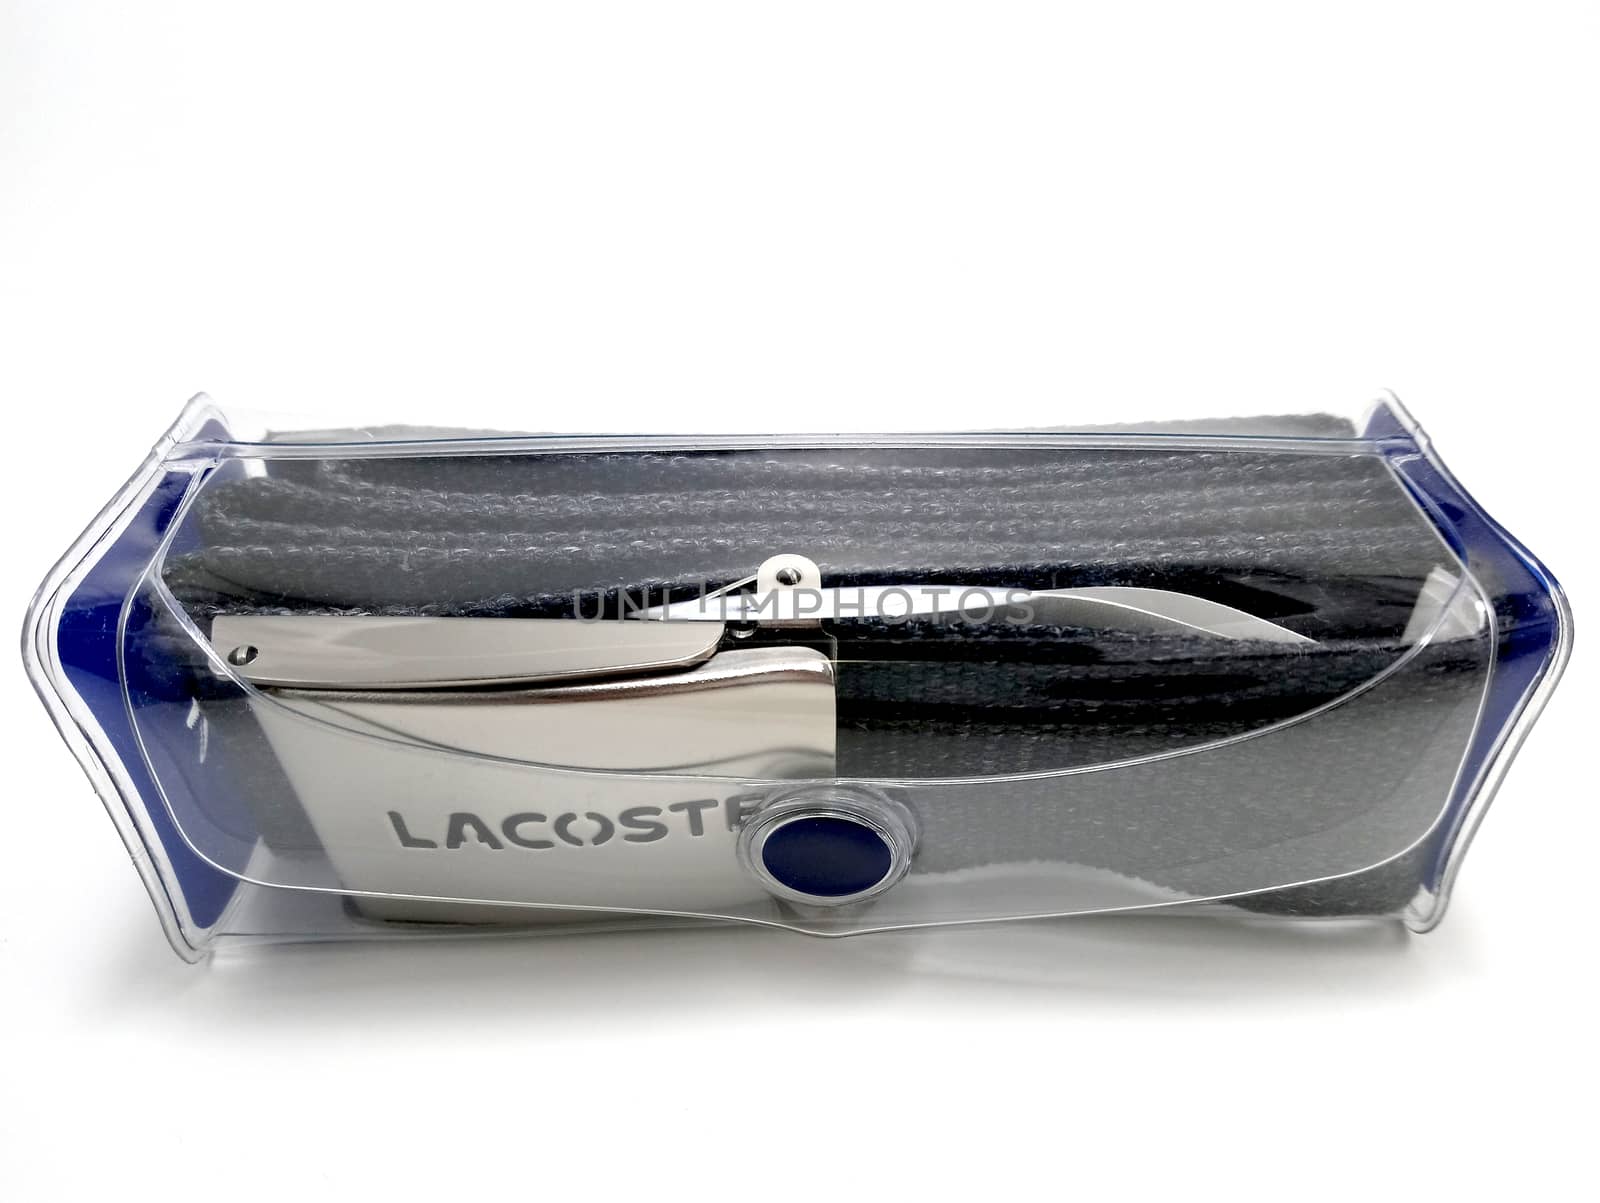 MANILA, PH - JUNE 23 - Lacoste navy blue belt strap and buckle on June 23, 2020 in Manila, Philippines.